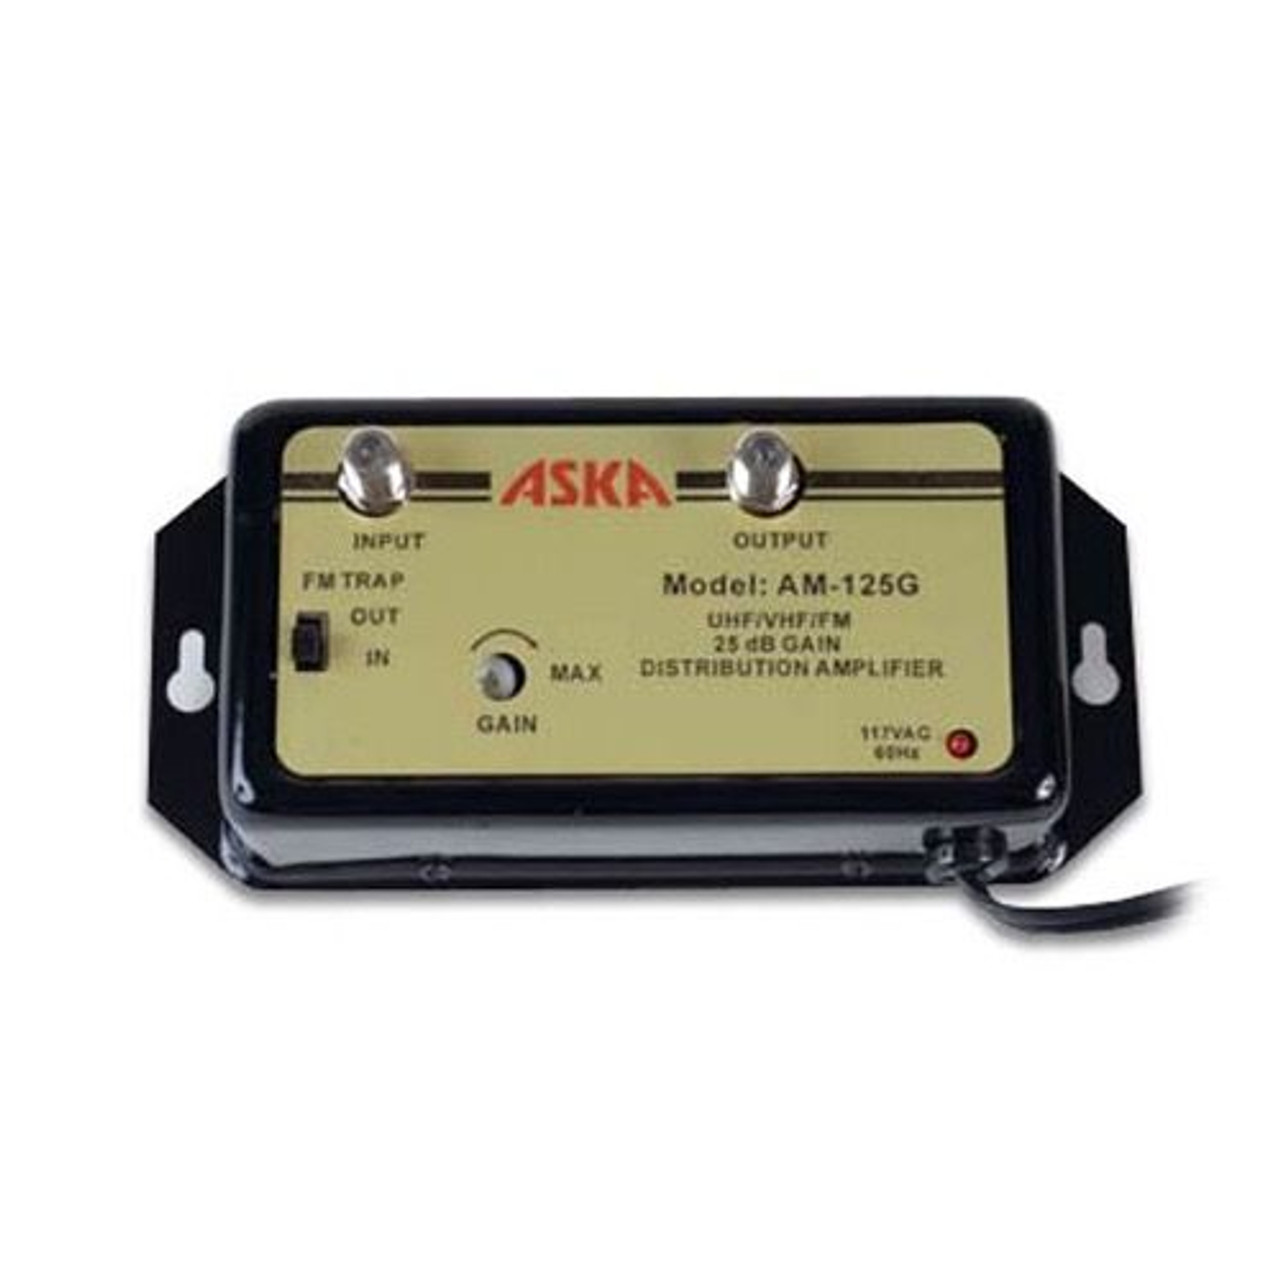 ASKA AM-125G 25 dB Distribution Amplifier with Gain and Tilt Control 1 GHz Broadband Drop 54-1000 MHz Frequency Range Signal Amp Adjustable Gain Home Systems